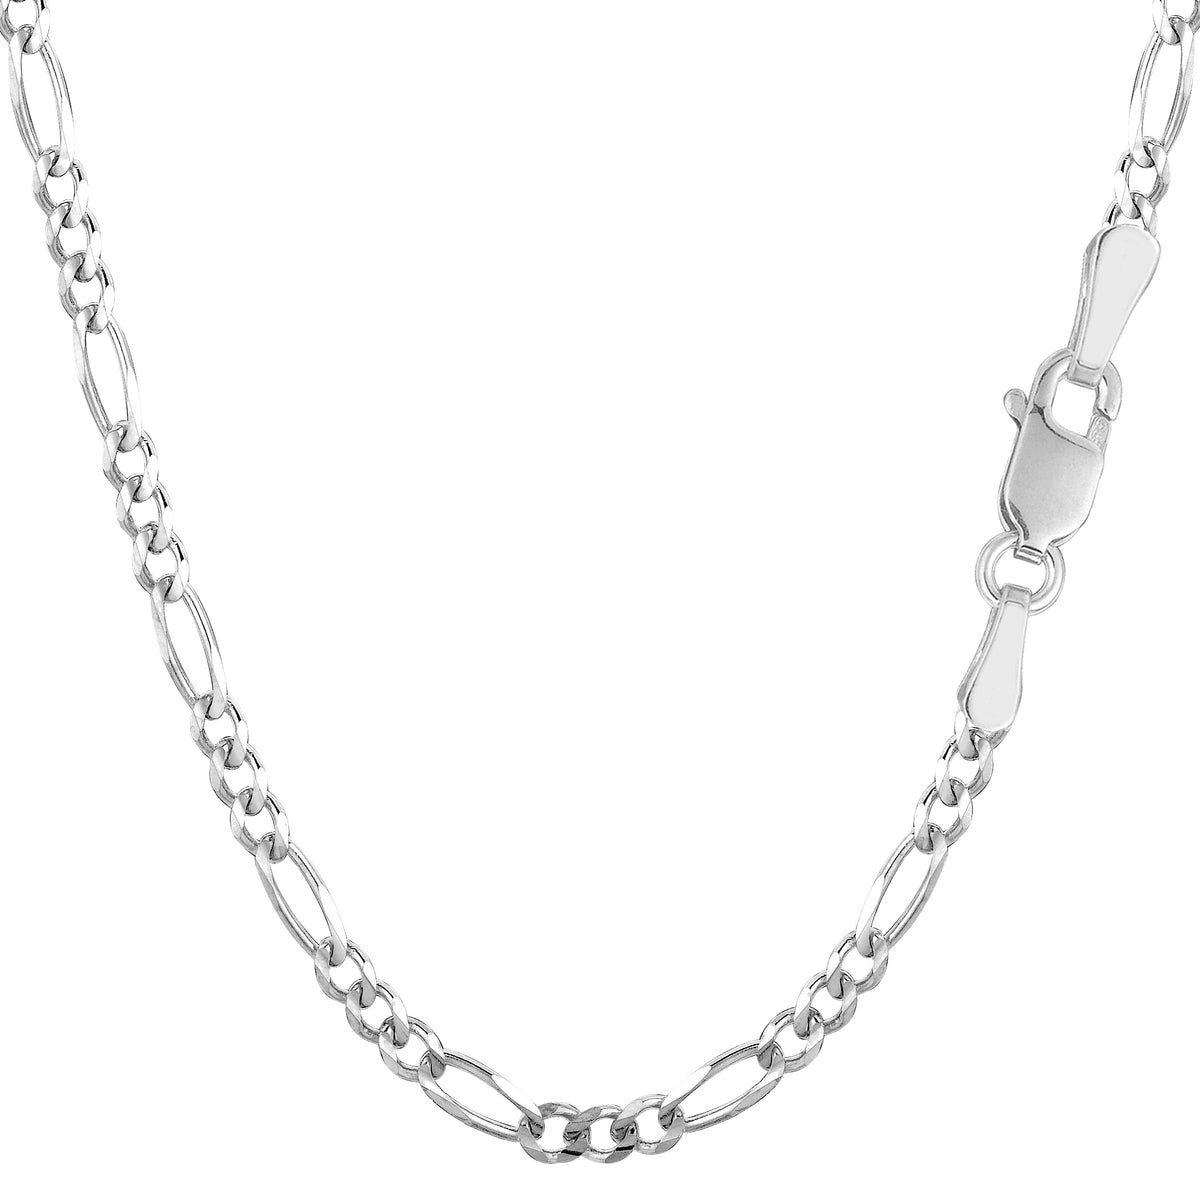 14k White Solid Gold Figaro Chain Necklace, 3.0mm